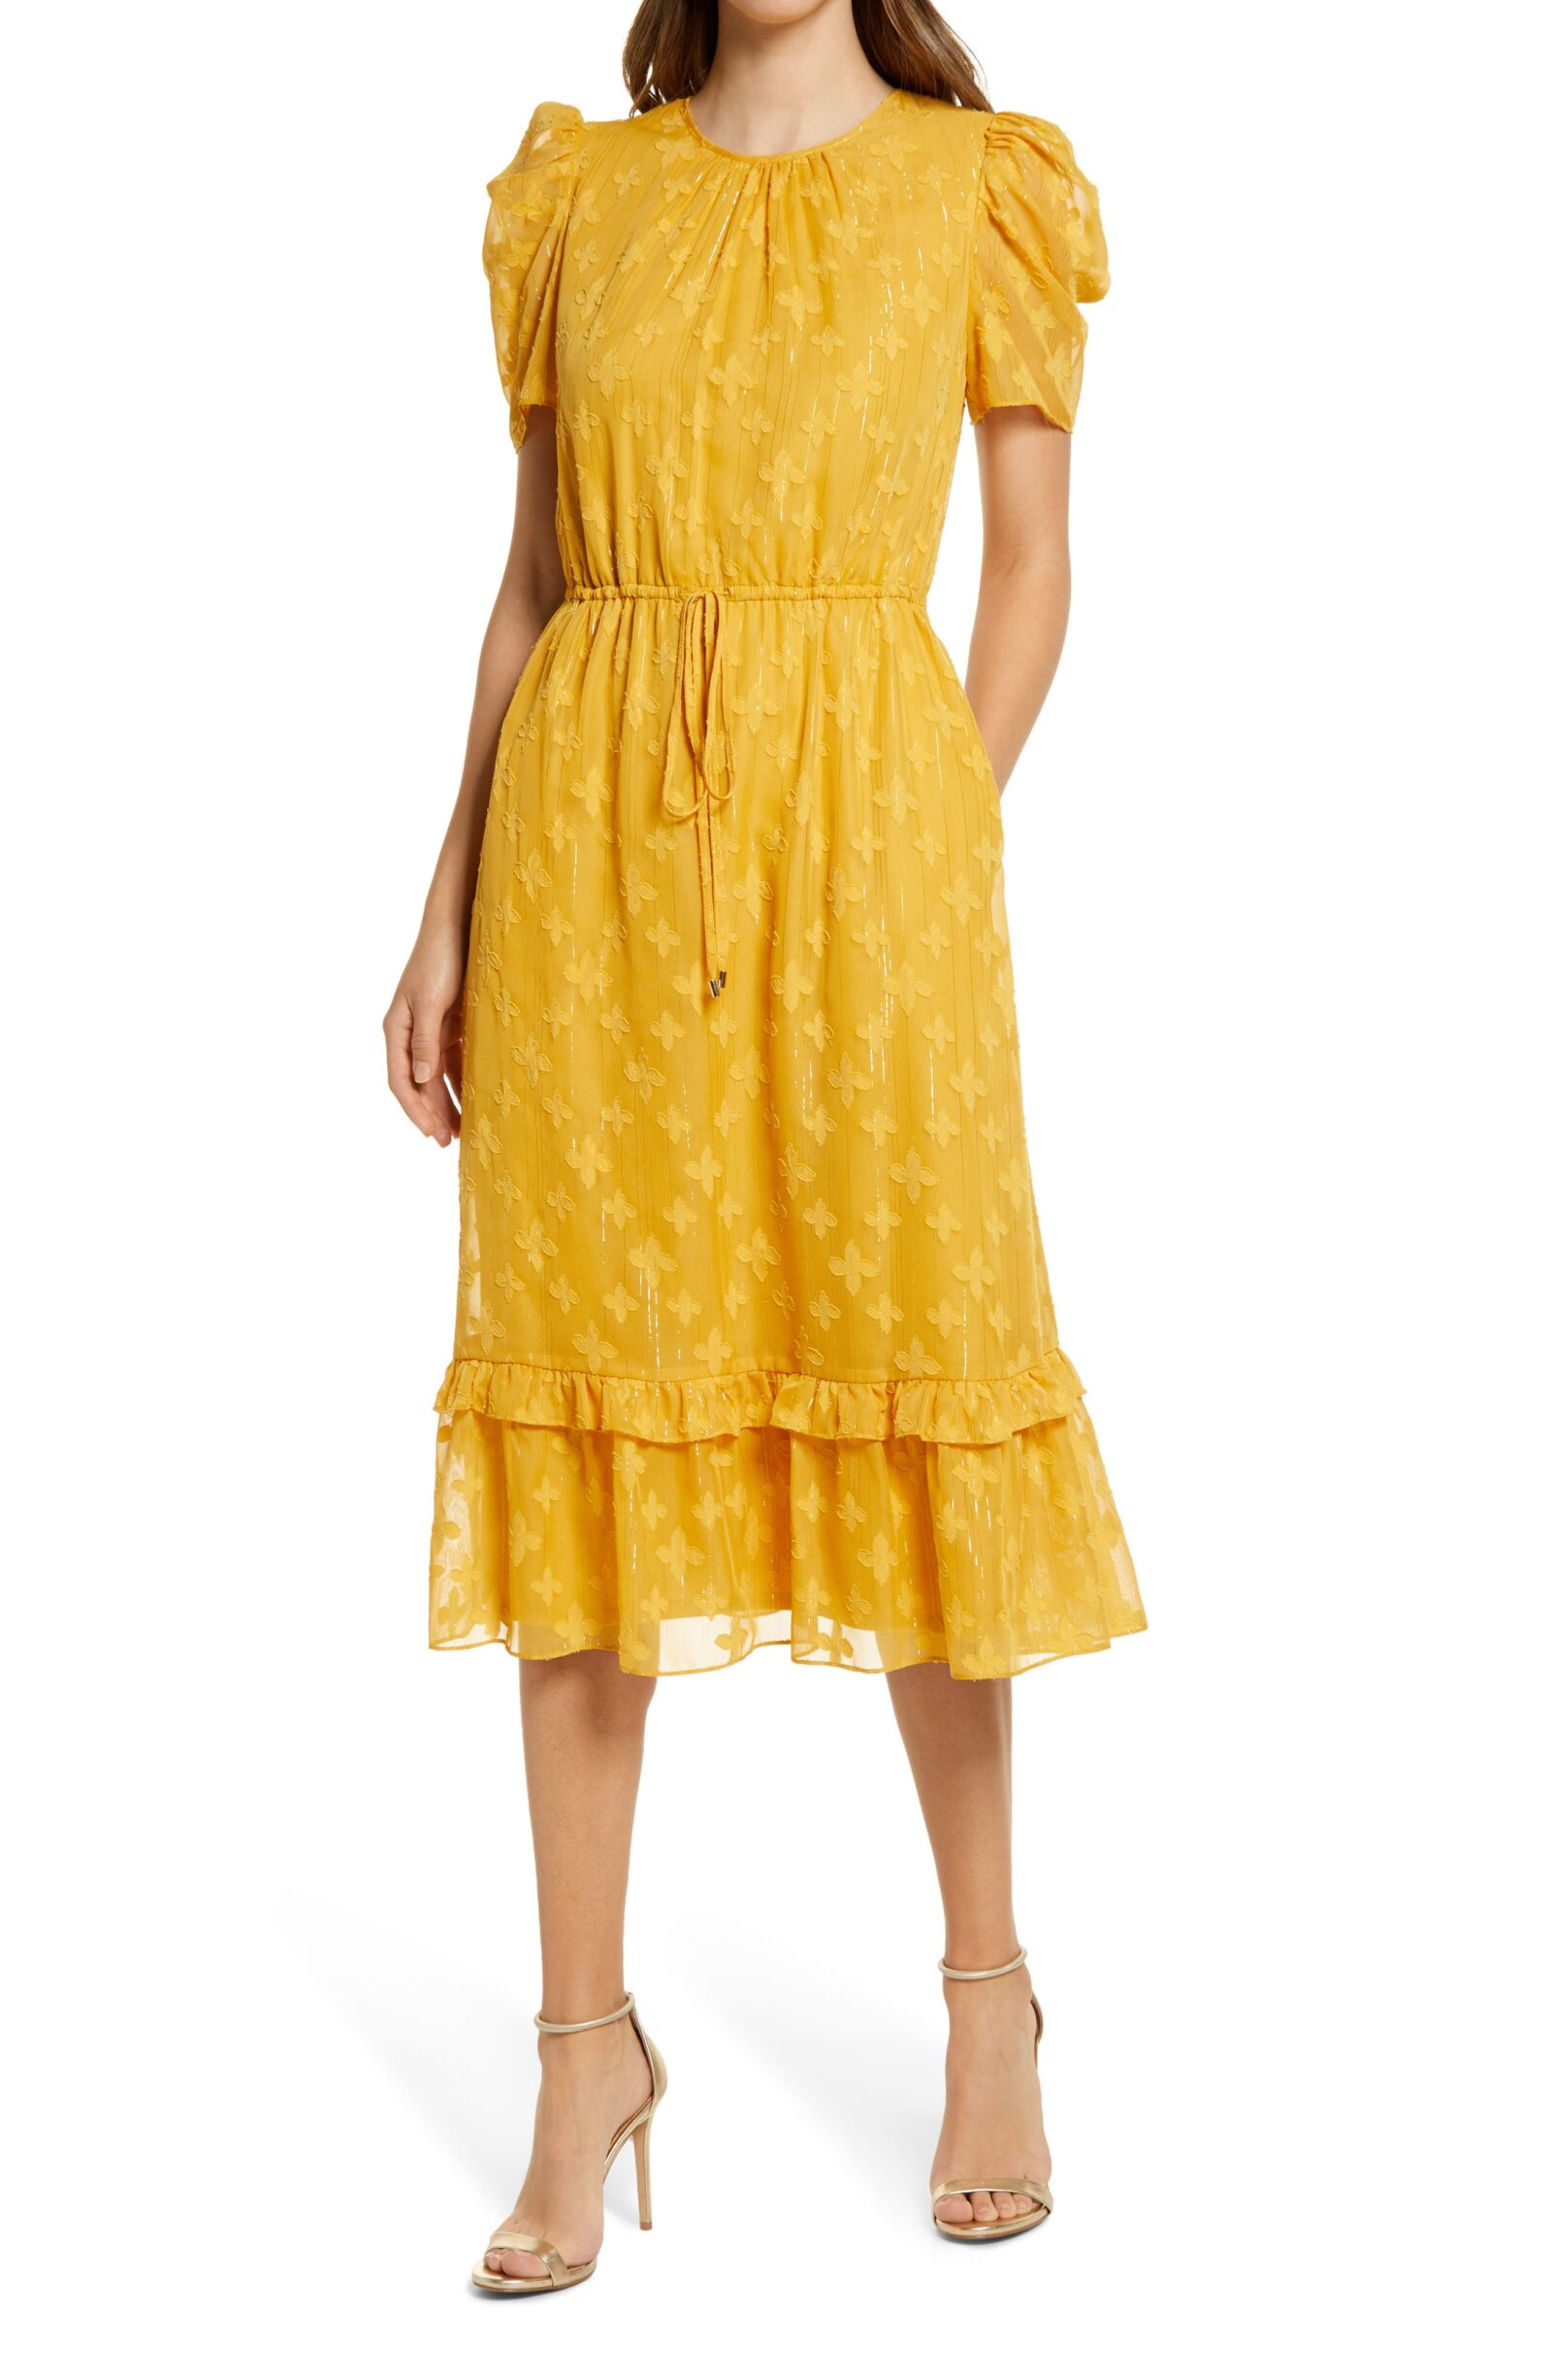 Dress From Nordstrom Anniversary Sale 2021